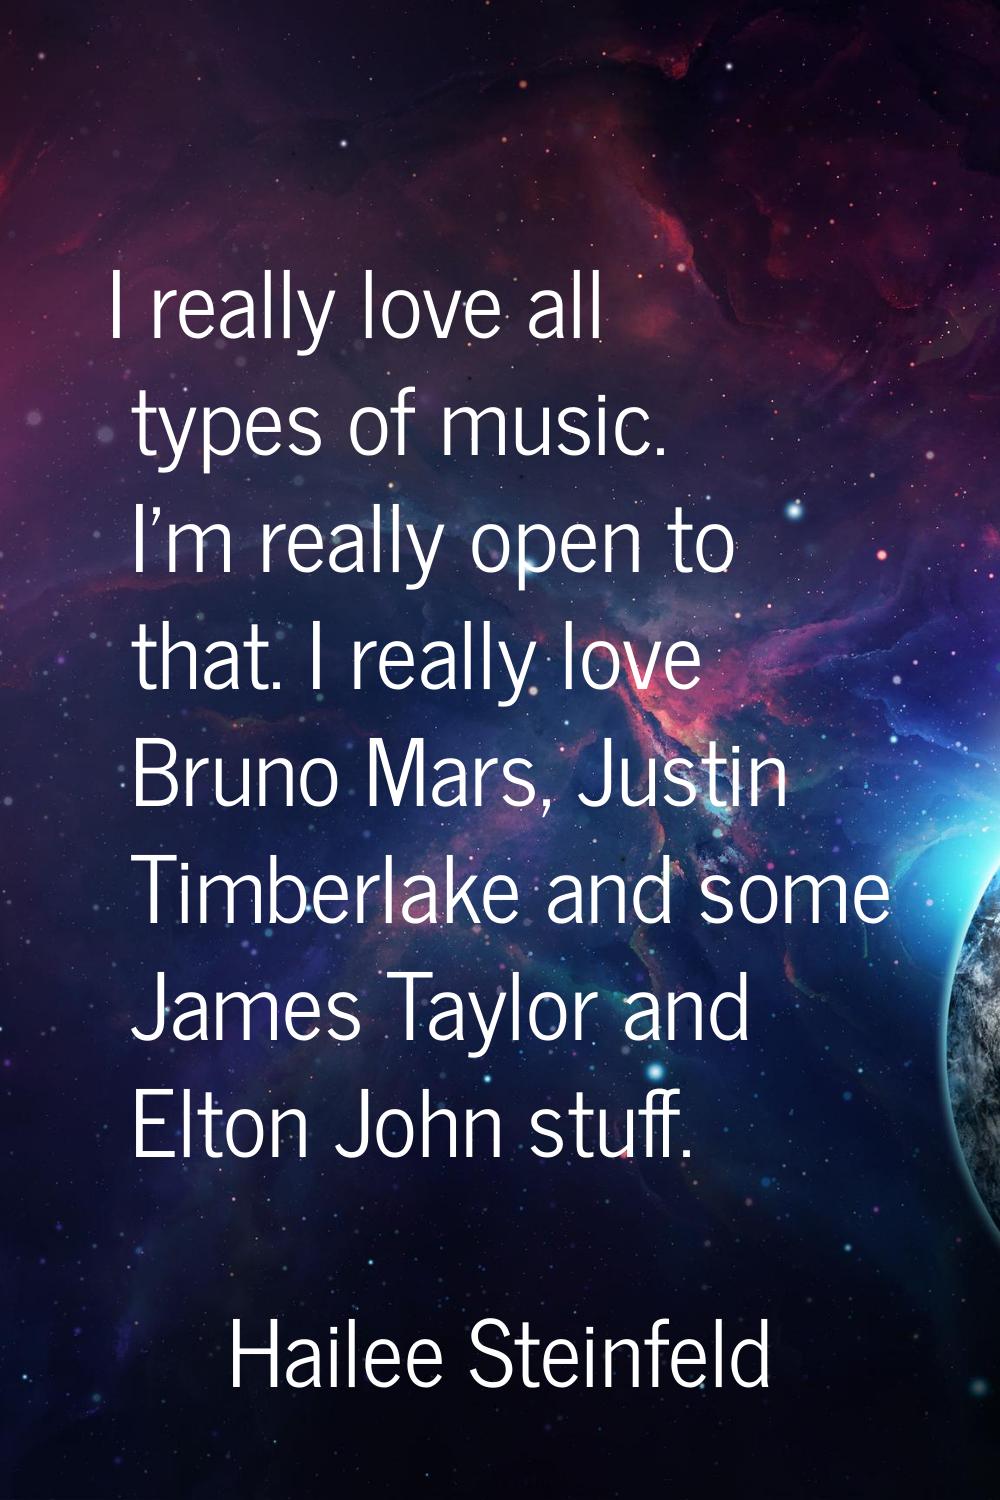 I really love all types of music. I'm really open to that. I really love Bruno Mars, Justin Timberl